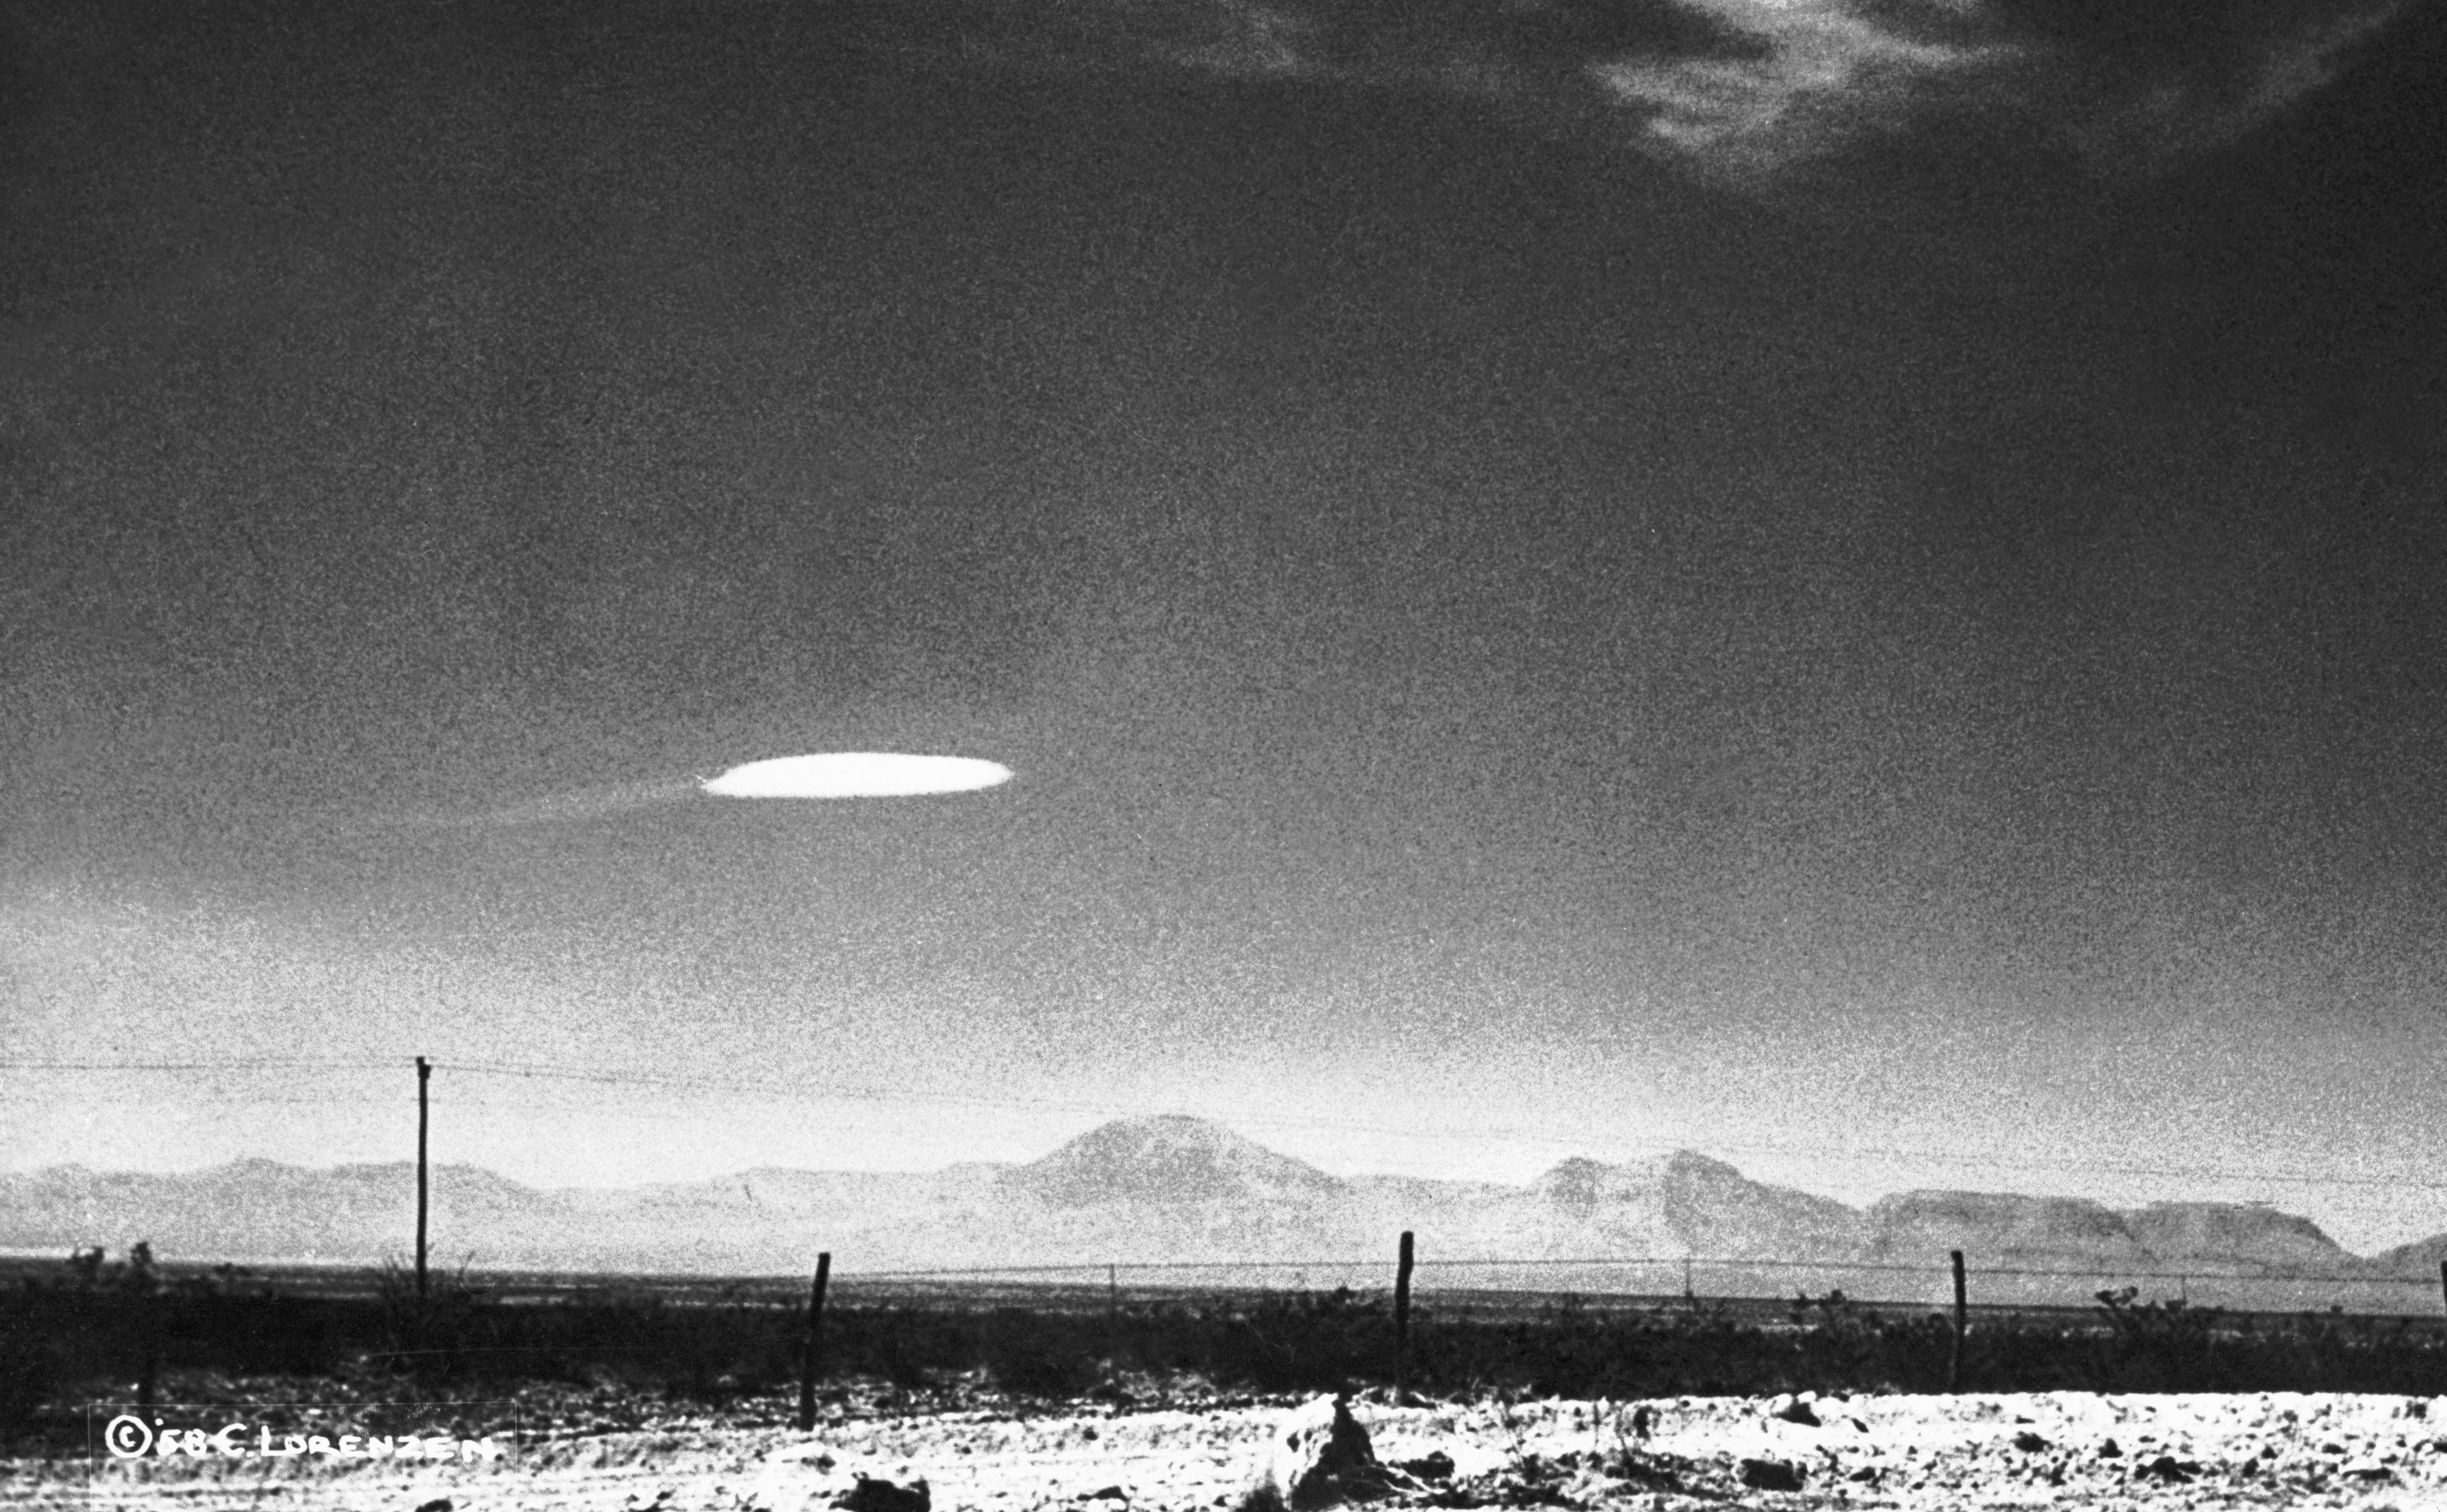 UFO over New Mexico in 1957